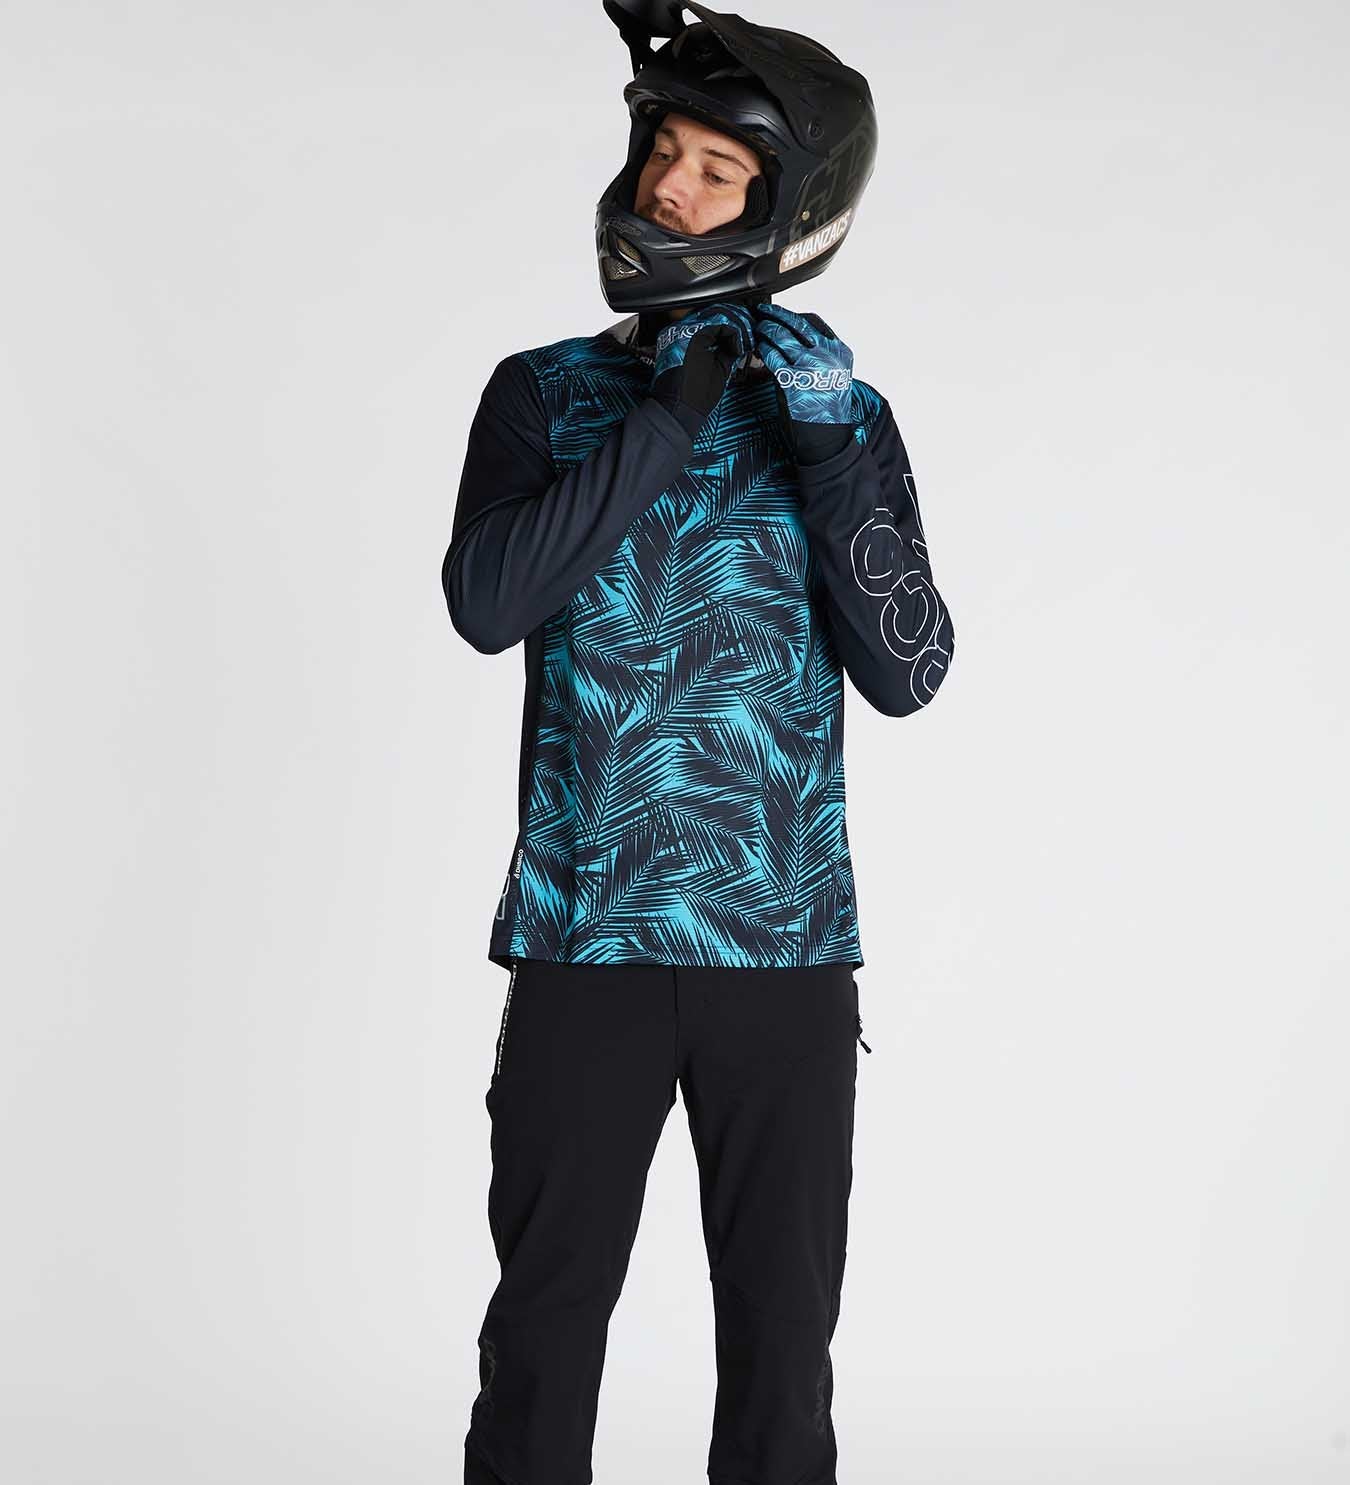 DHaRCO Mens Long Sleeve Gravity Jersey - Ice Palm